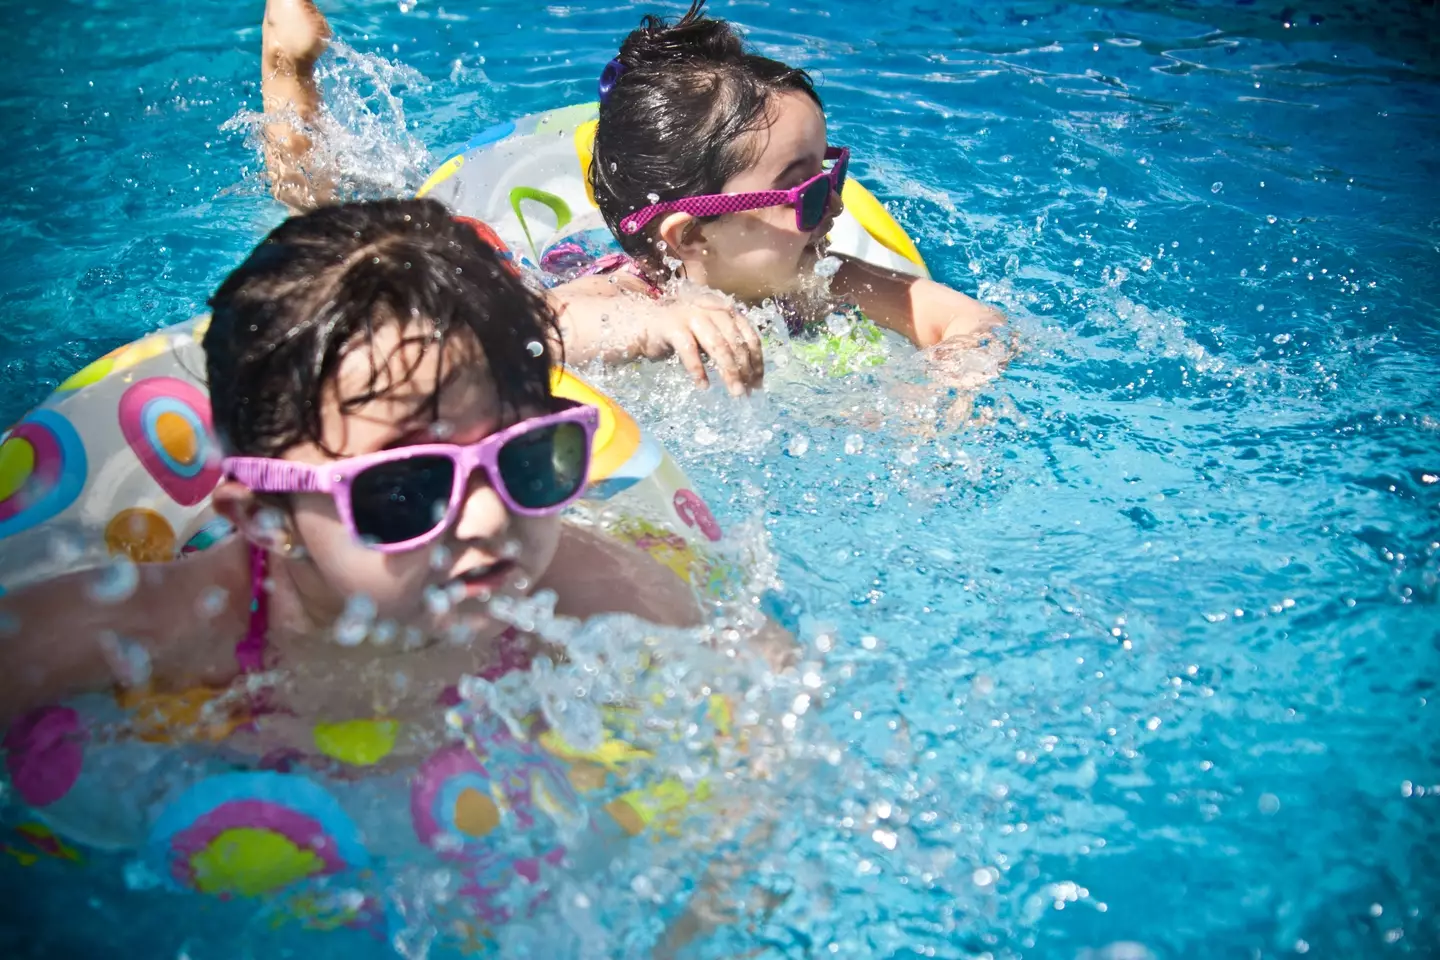 Parents are urged to always watch their kids in pools.